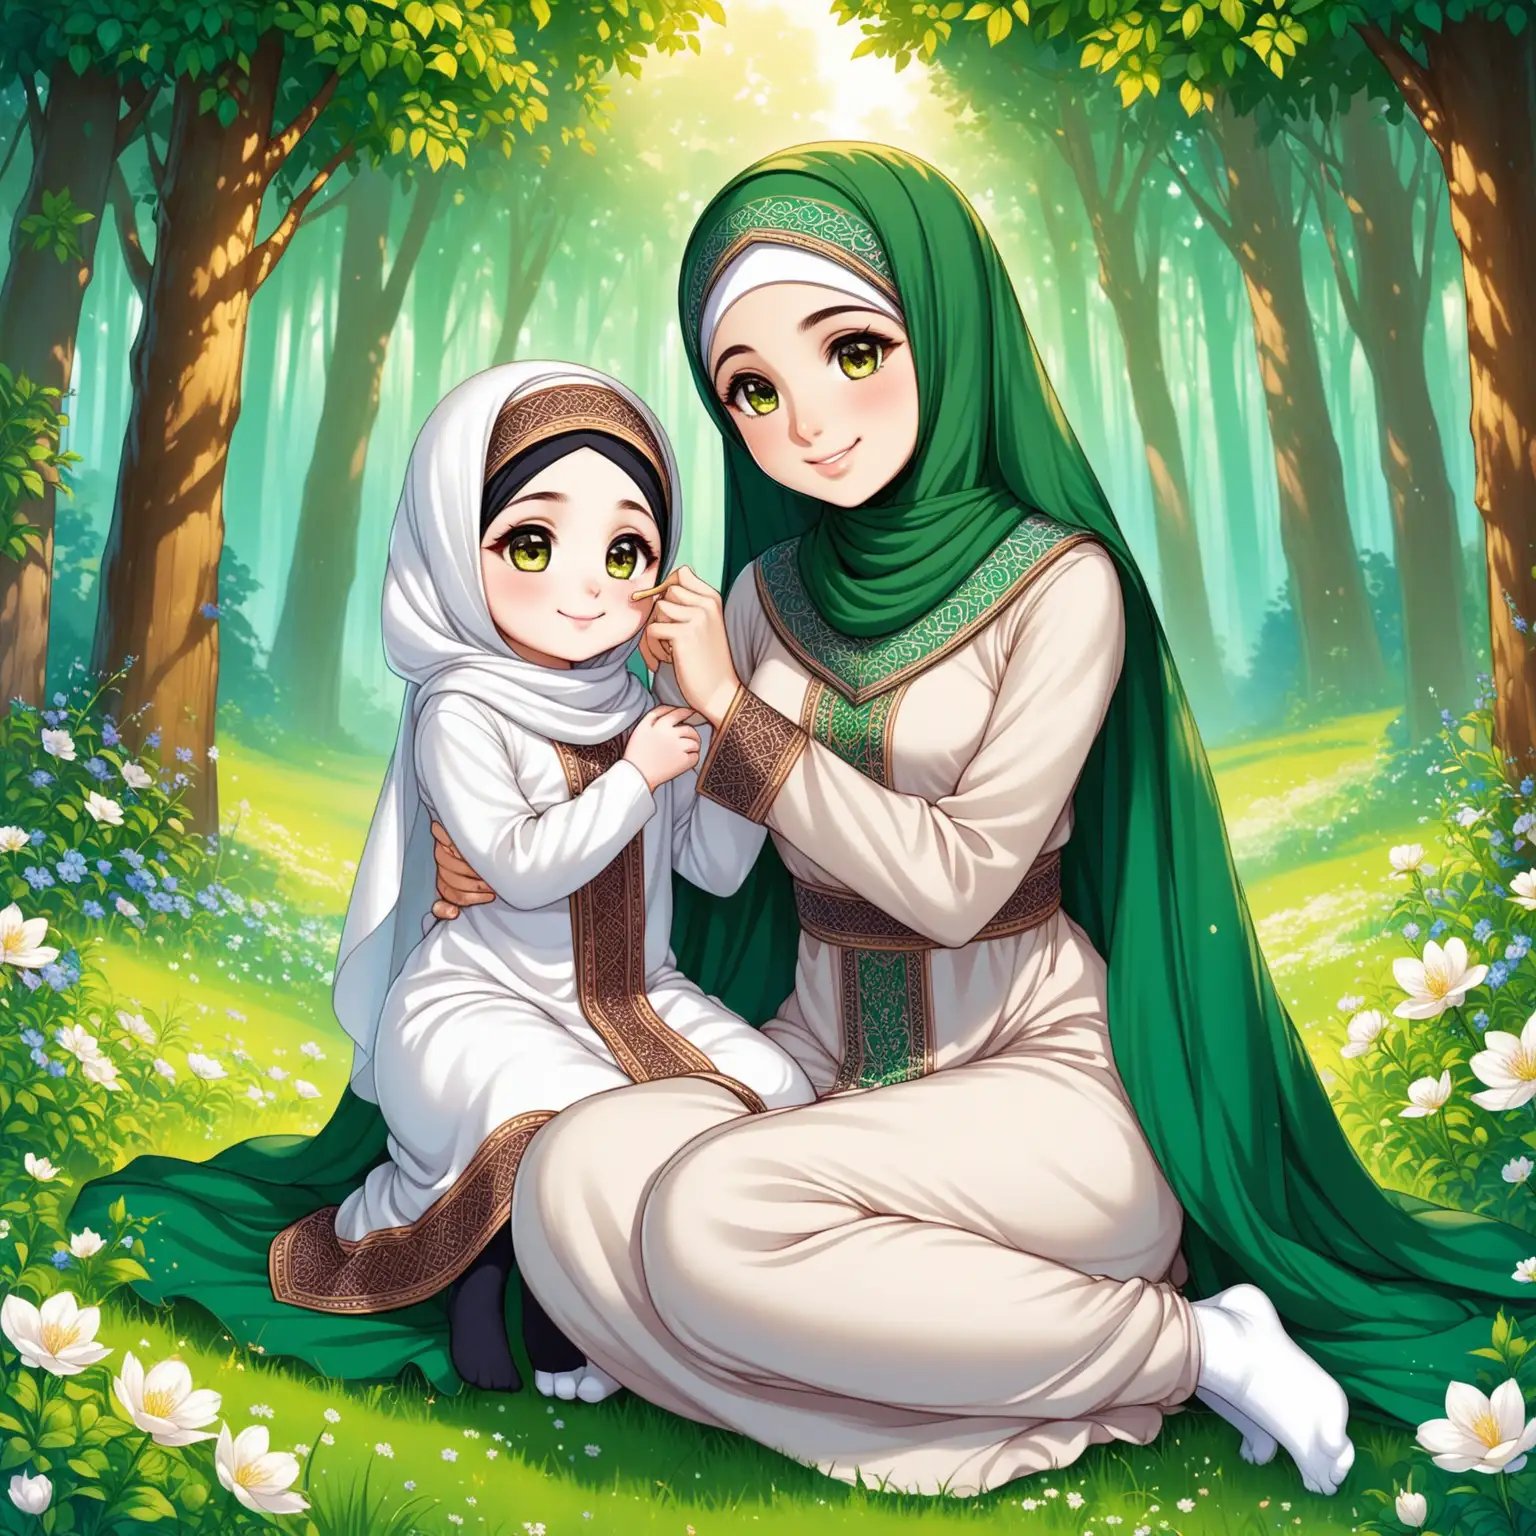 Character Persian girl(full height, Muslim, with emphasis no hair out of veil(Hijab), smaller eyes, bigger nose, white skin, cute, smiling, wearing socks, clothes full of Persian designs) named Fatemeh. Fatemeh is sitting kissing the hand of her mother politely.

Atmosphere forest, grass flowers, etc...